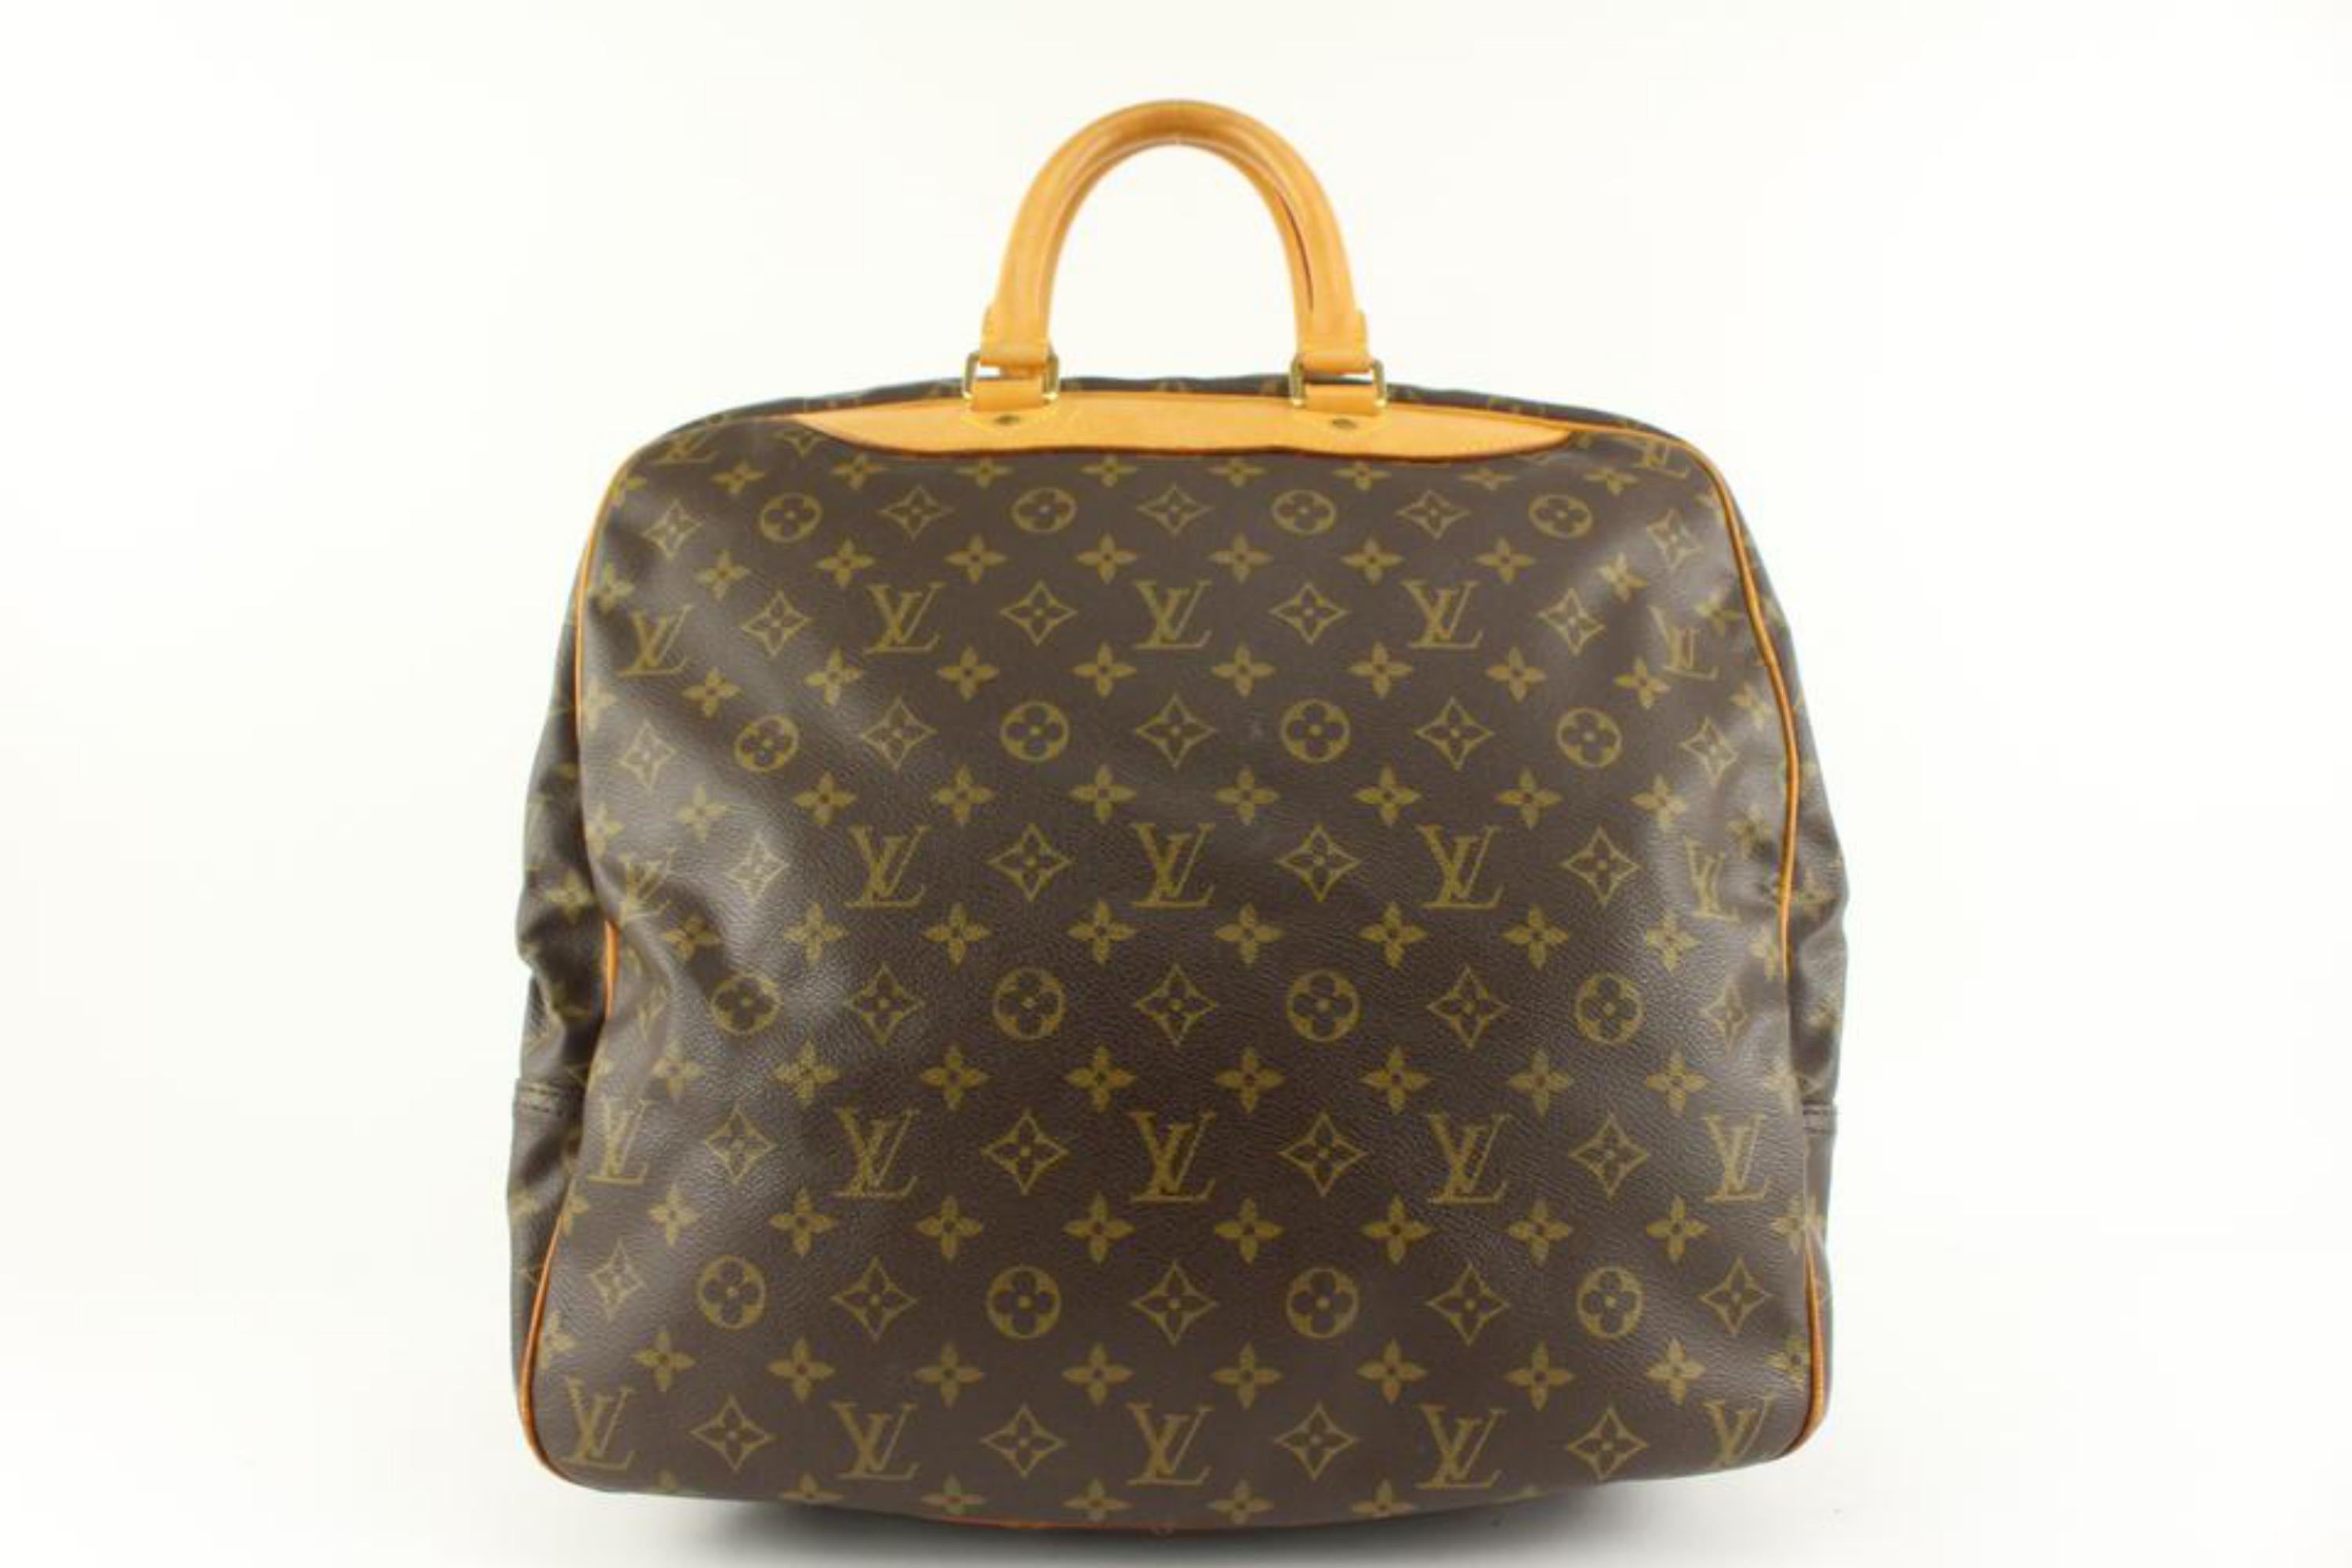 Louis Vuitton Rare Small Size Monogram Sac Evasion Sports Bag 1222lv25 In Good Condition For Sale In Dix hills, NY